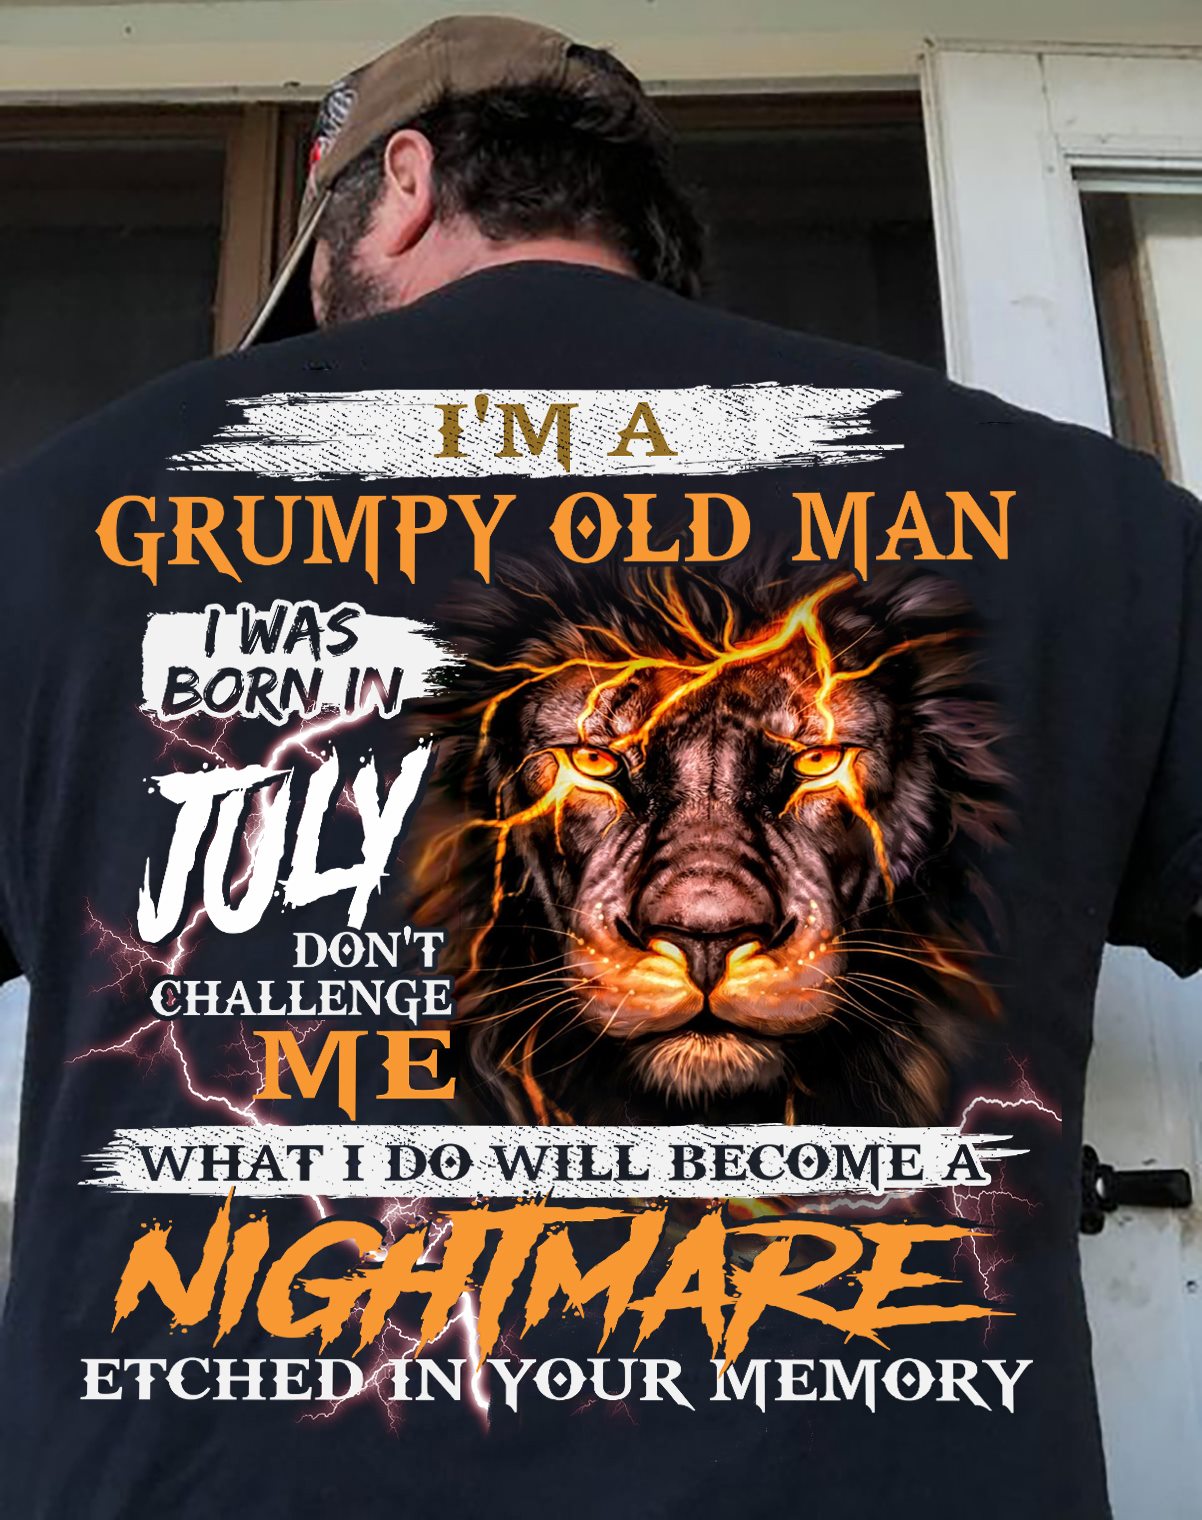 I'm a grumpy old man I was born in July don't challenge me - Lion and old man